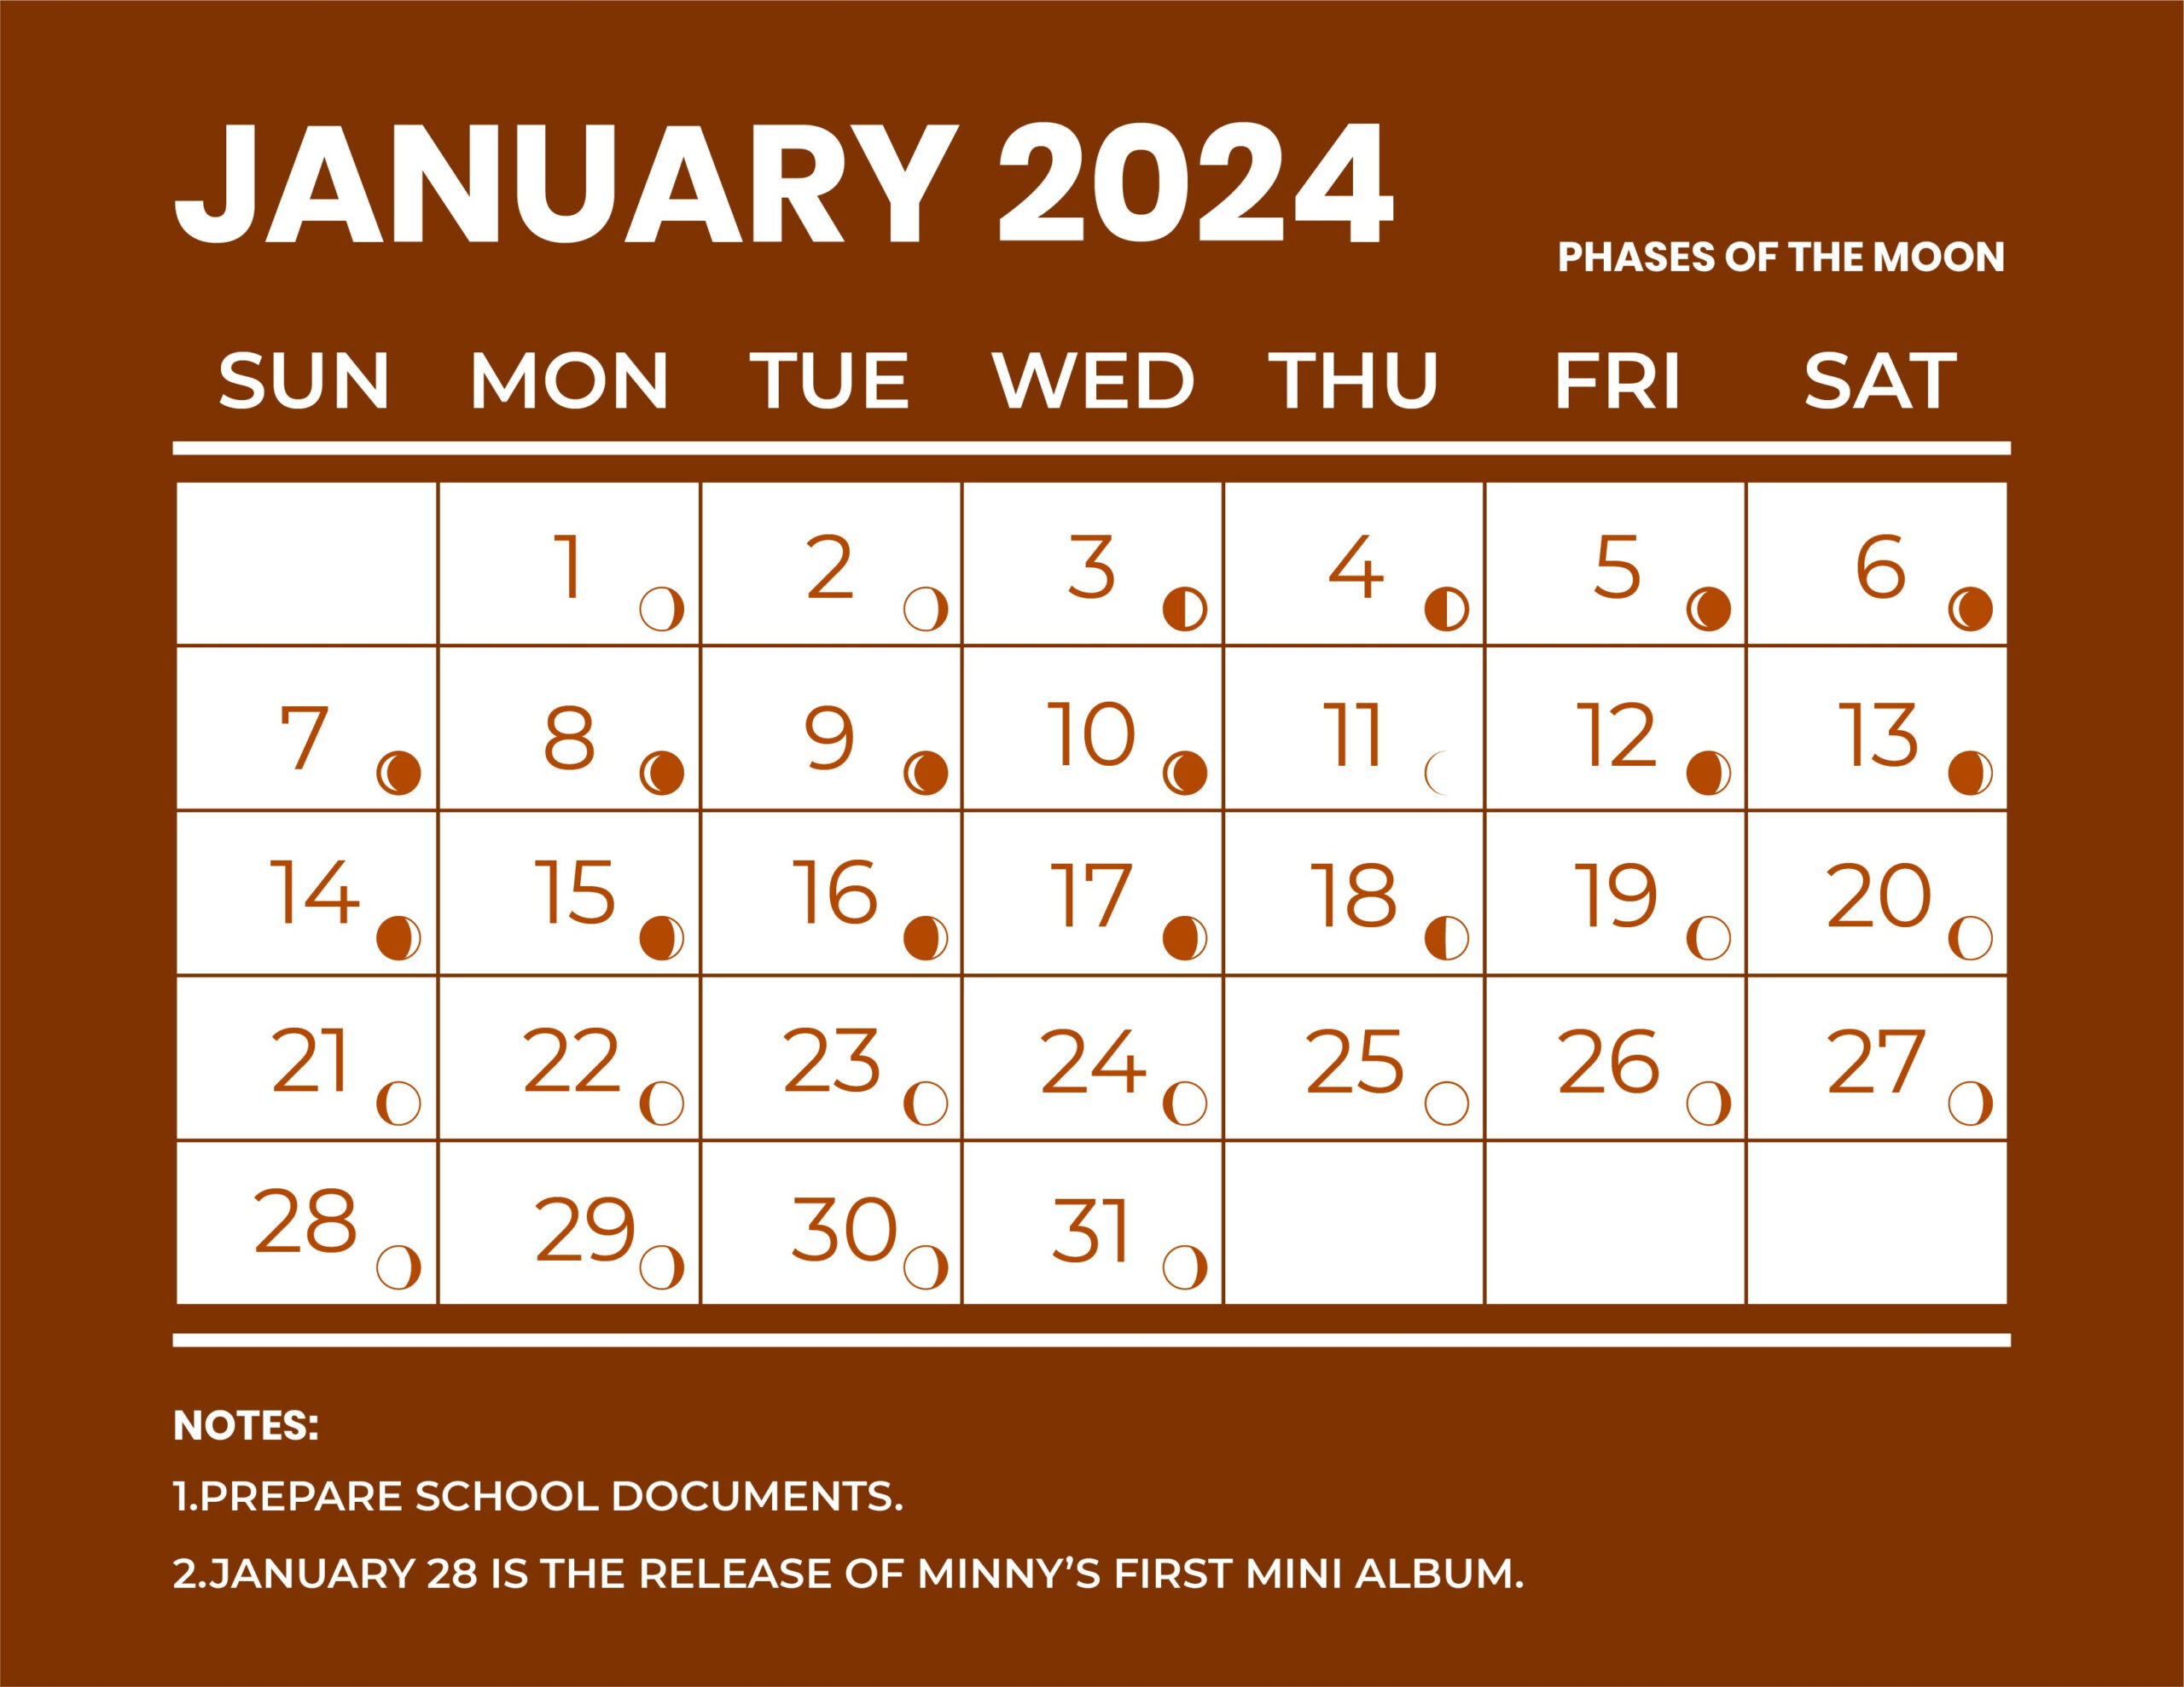 January 2024 Calendar With Moon Phases - Word, Illustrator, Eps for Printable 2024 Calendar With Moon Phases